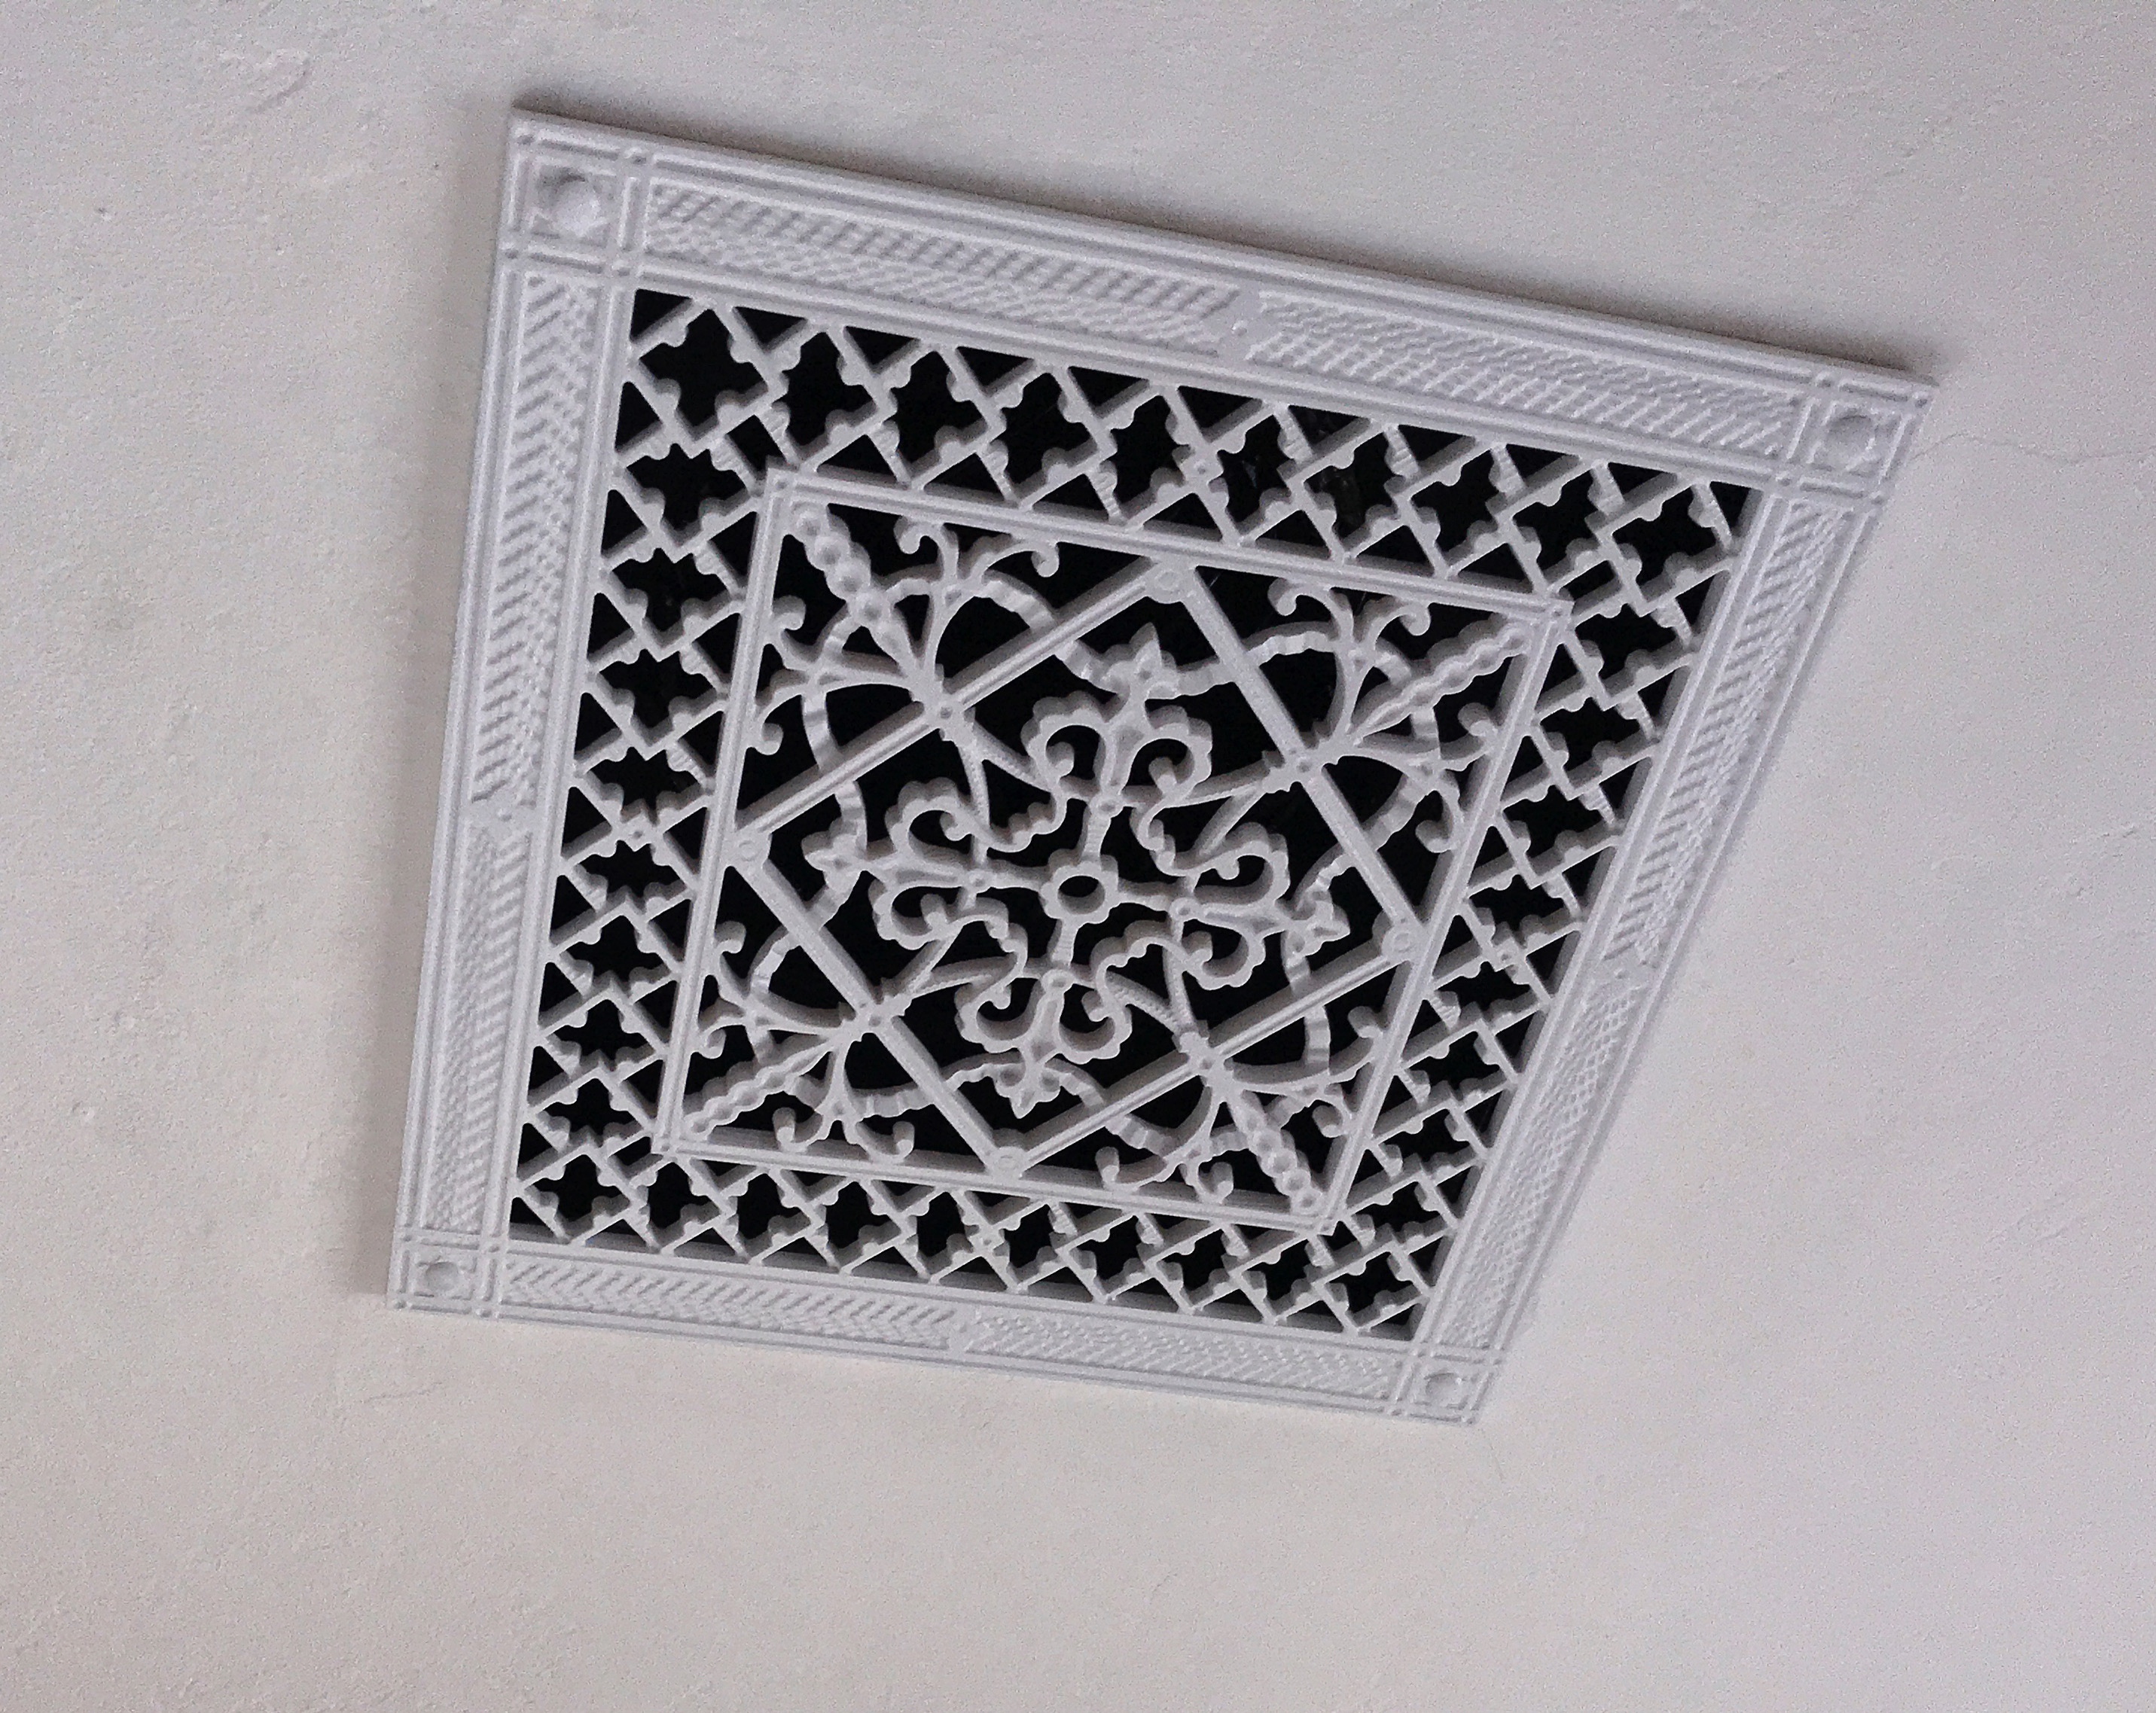 Decorative Vent Cover in Arts and Crafts Style installed on the ceiling